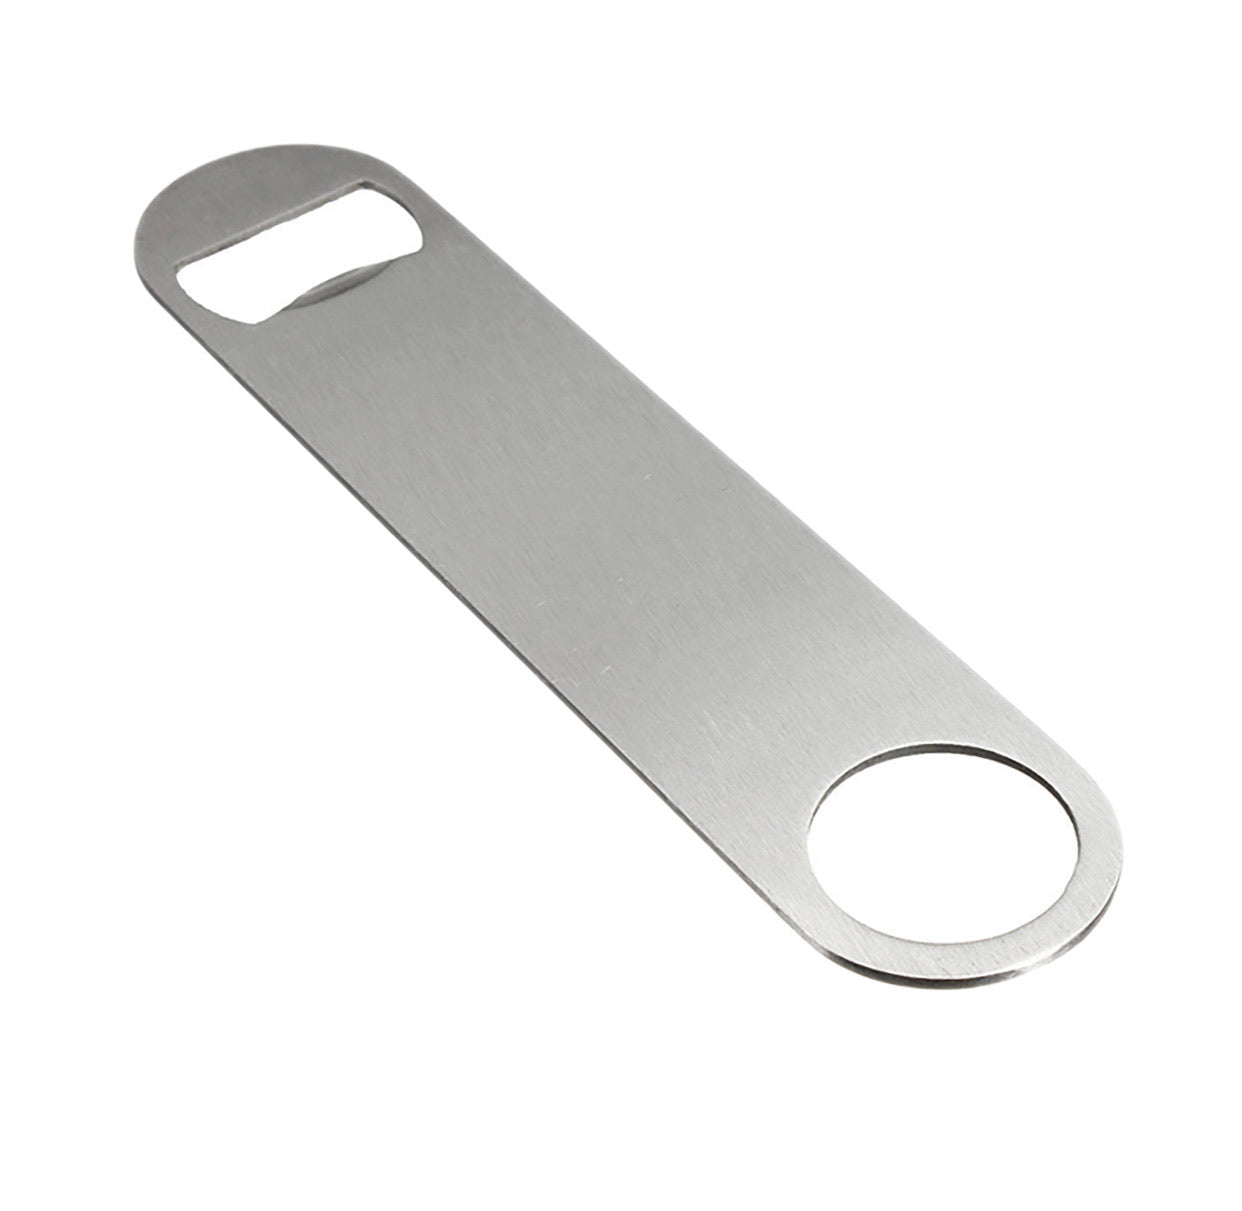 Stainless steel Sublimation 1 1/2" x 7" Bottle Opener(SET OF 12)